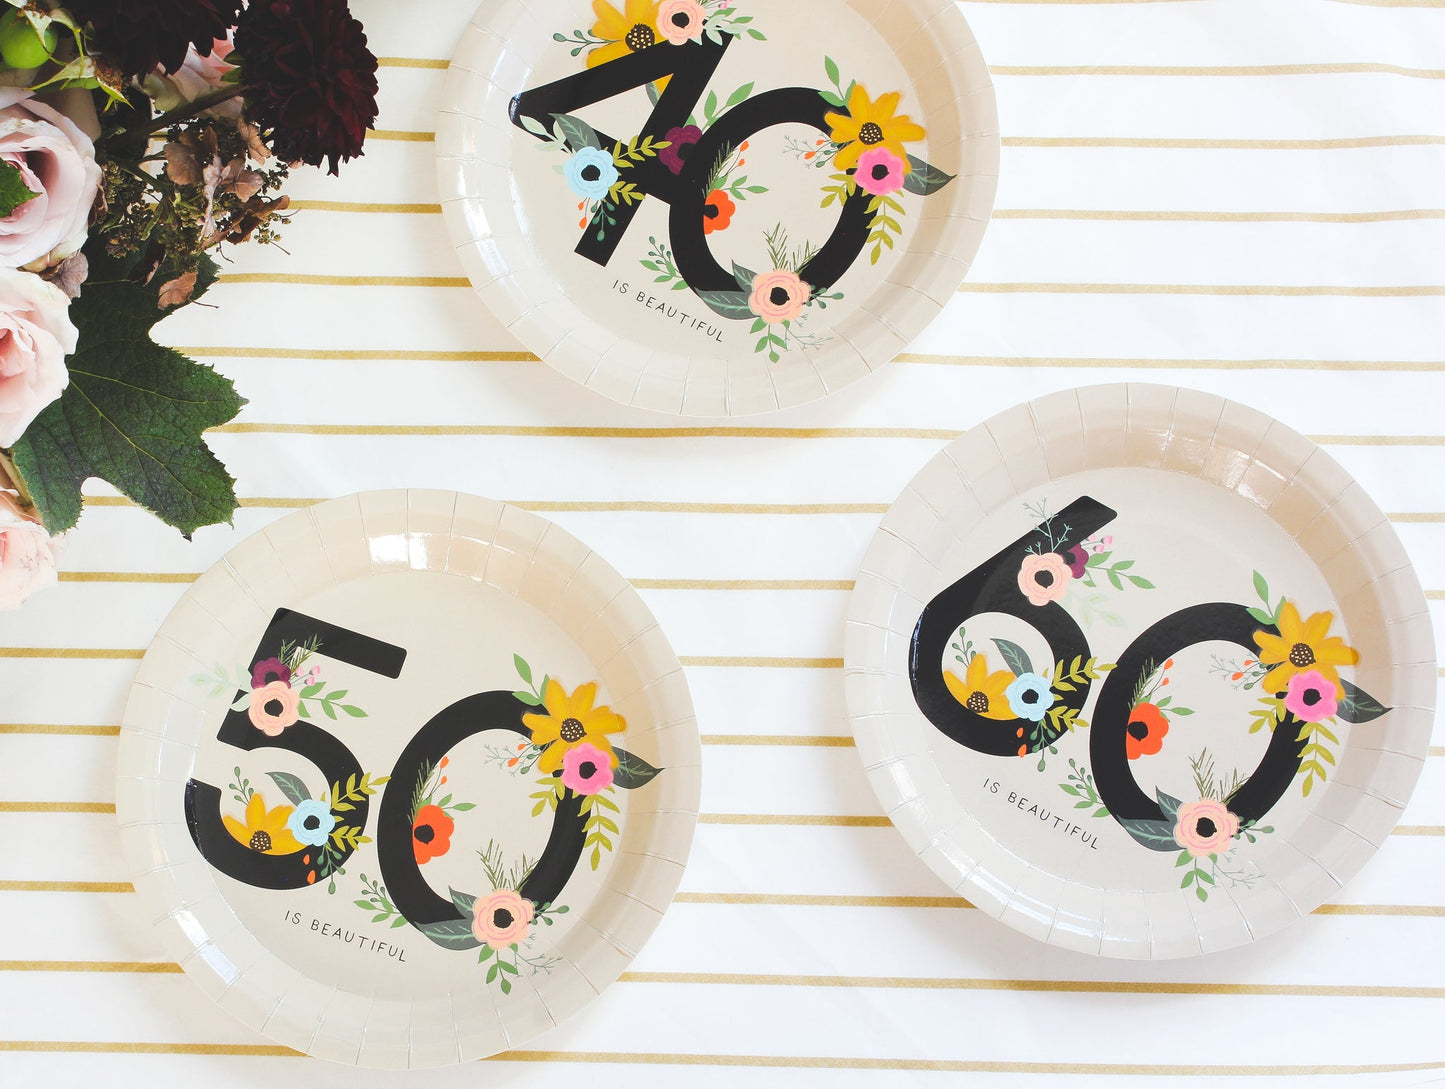 60 is Beautiful Birthday Party Plates